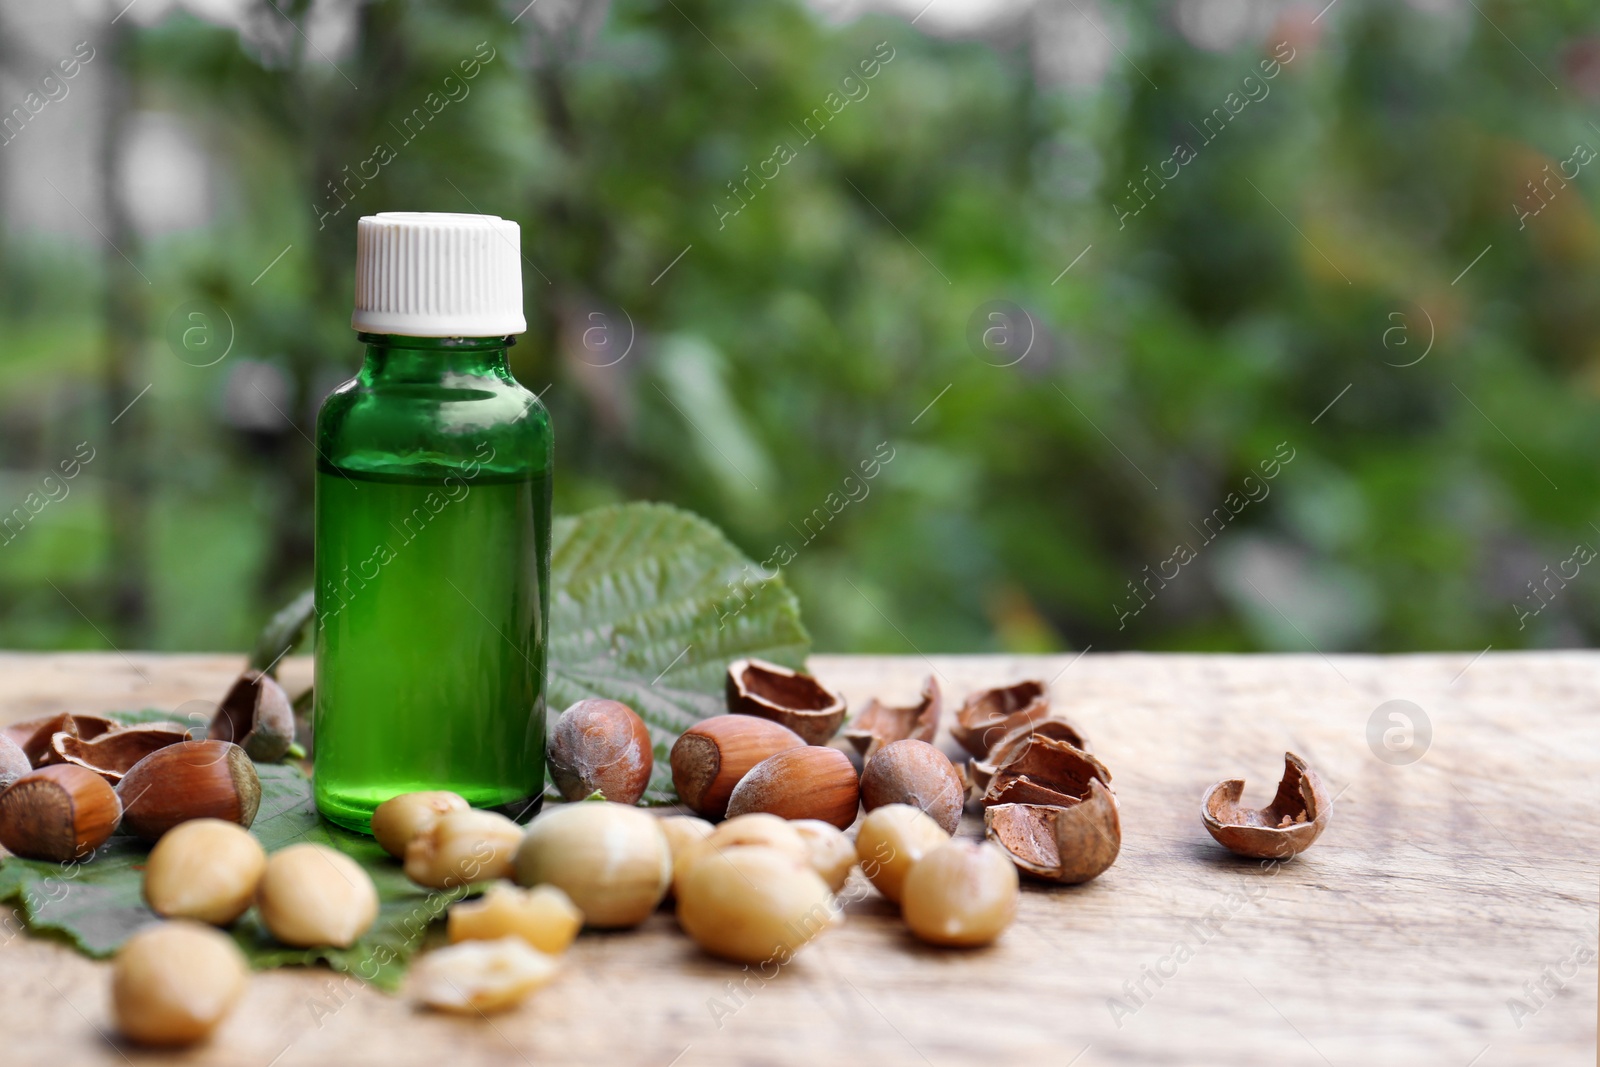 Photo of Bottle of hazelnut essential oil and nuts on wooden table. Space for text